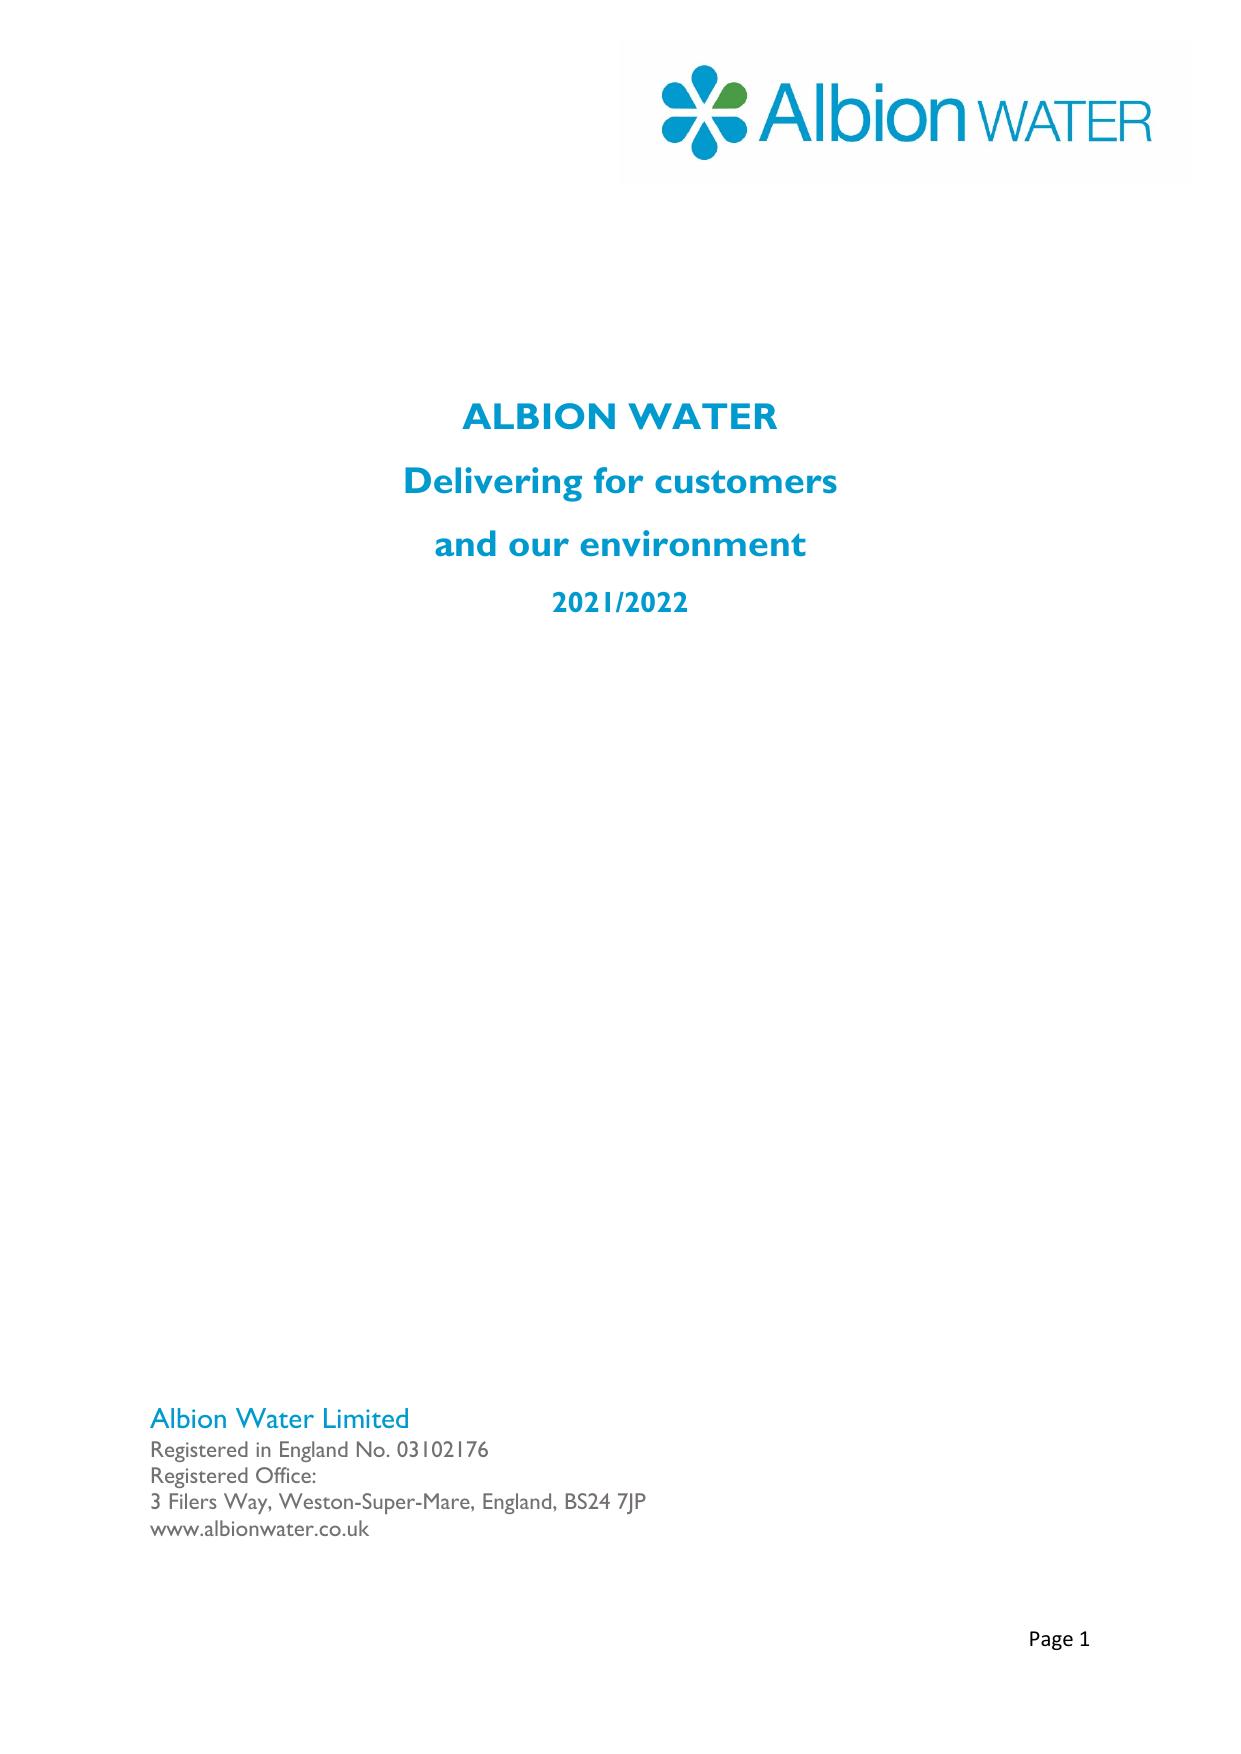 ALBIONWATER 2022 Annual Report